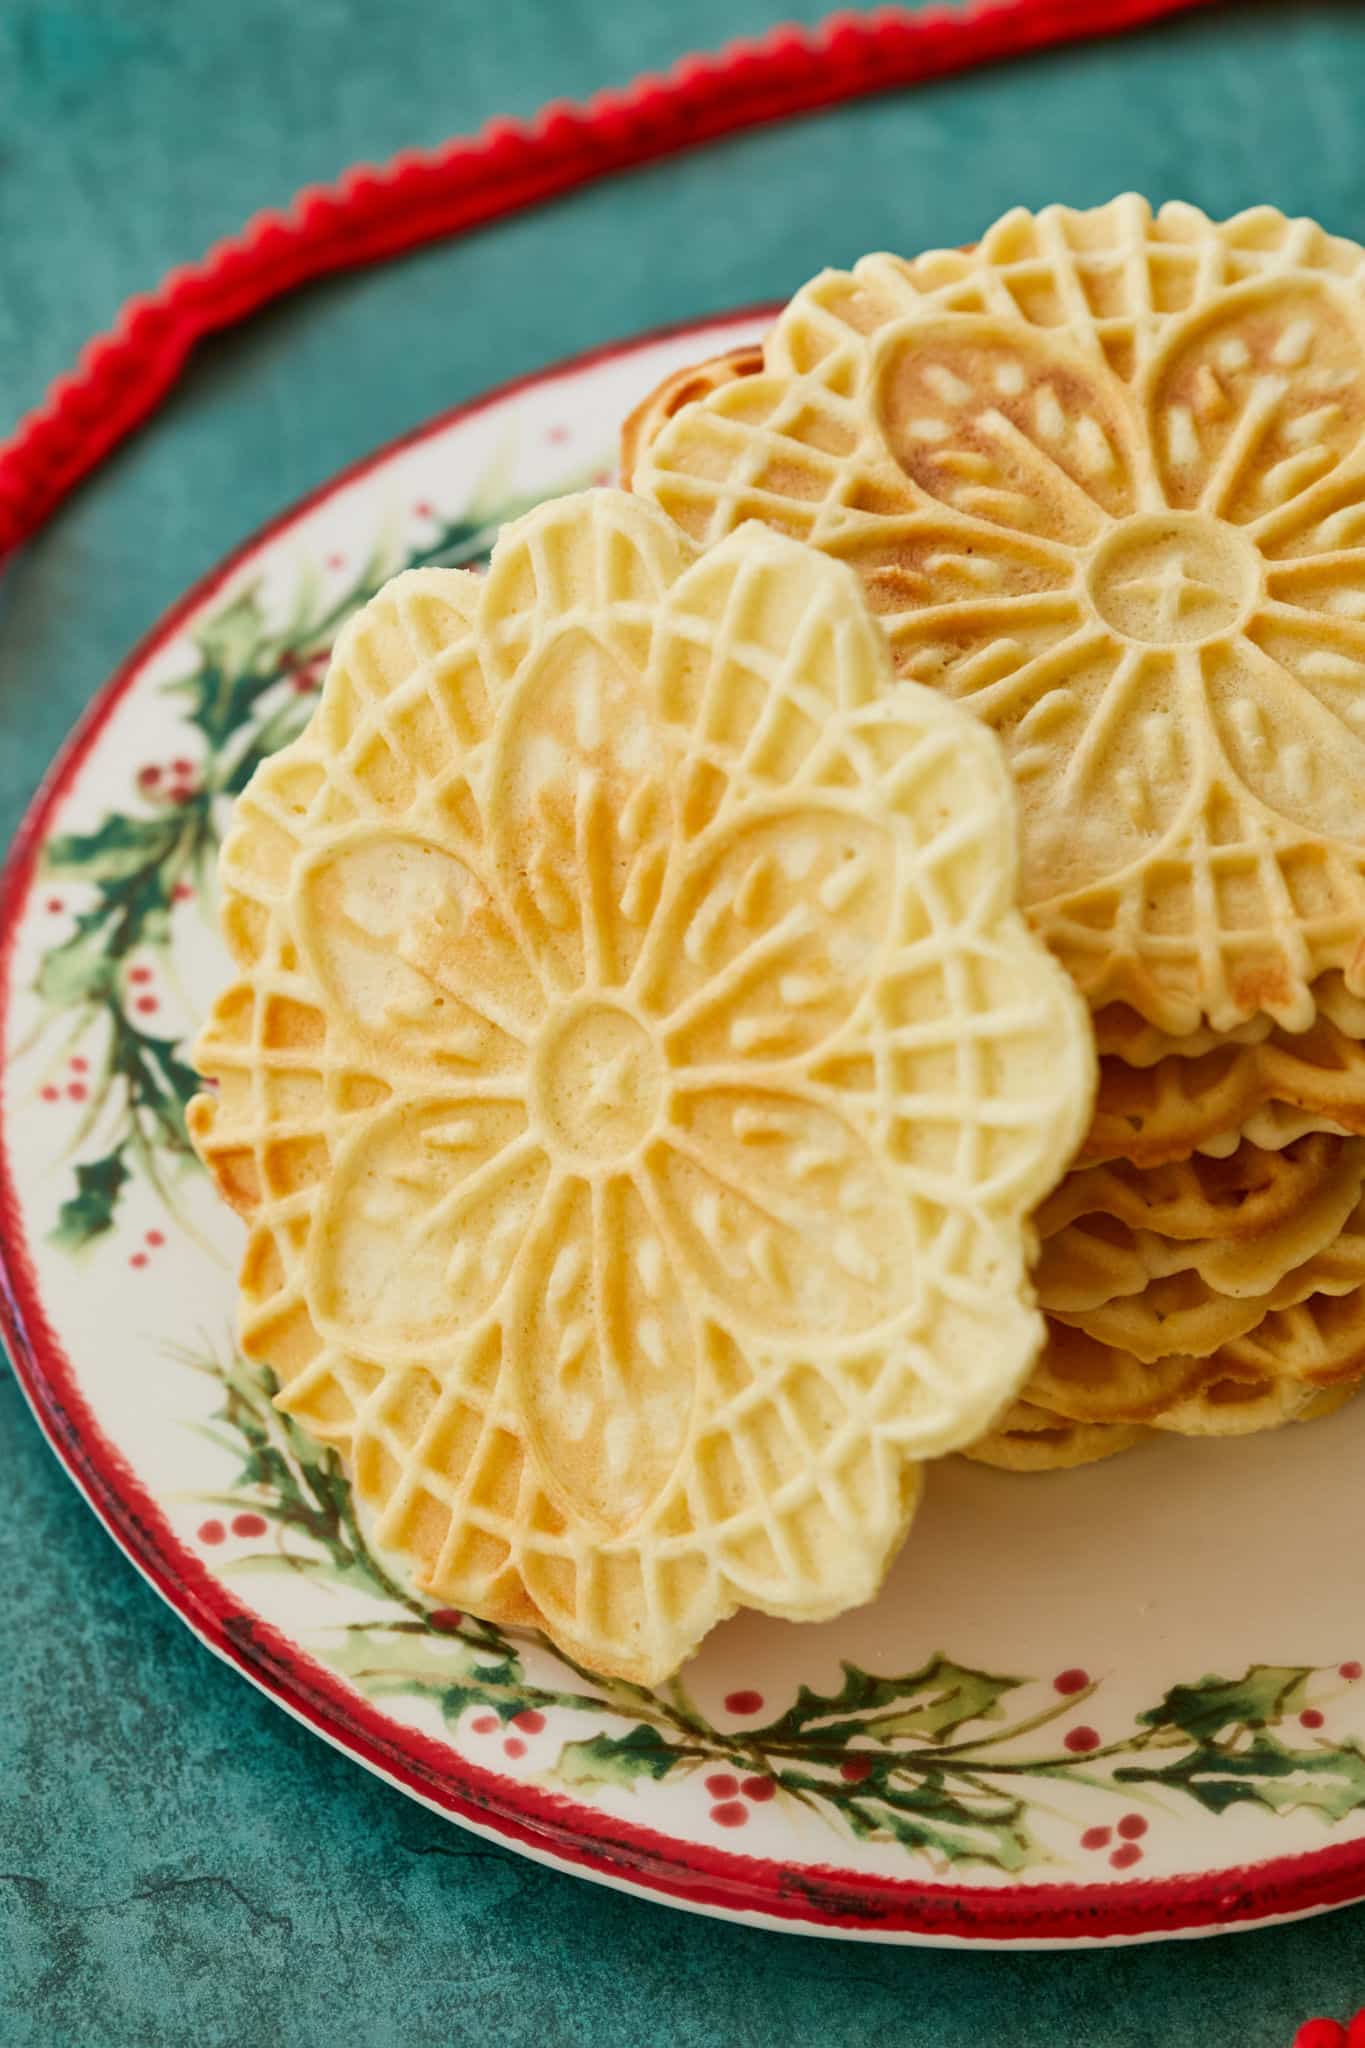 A pizzelle leaning up against a stack of them on a holiday plate.